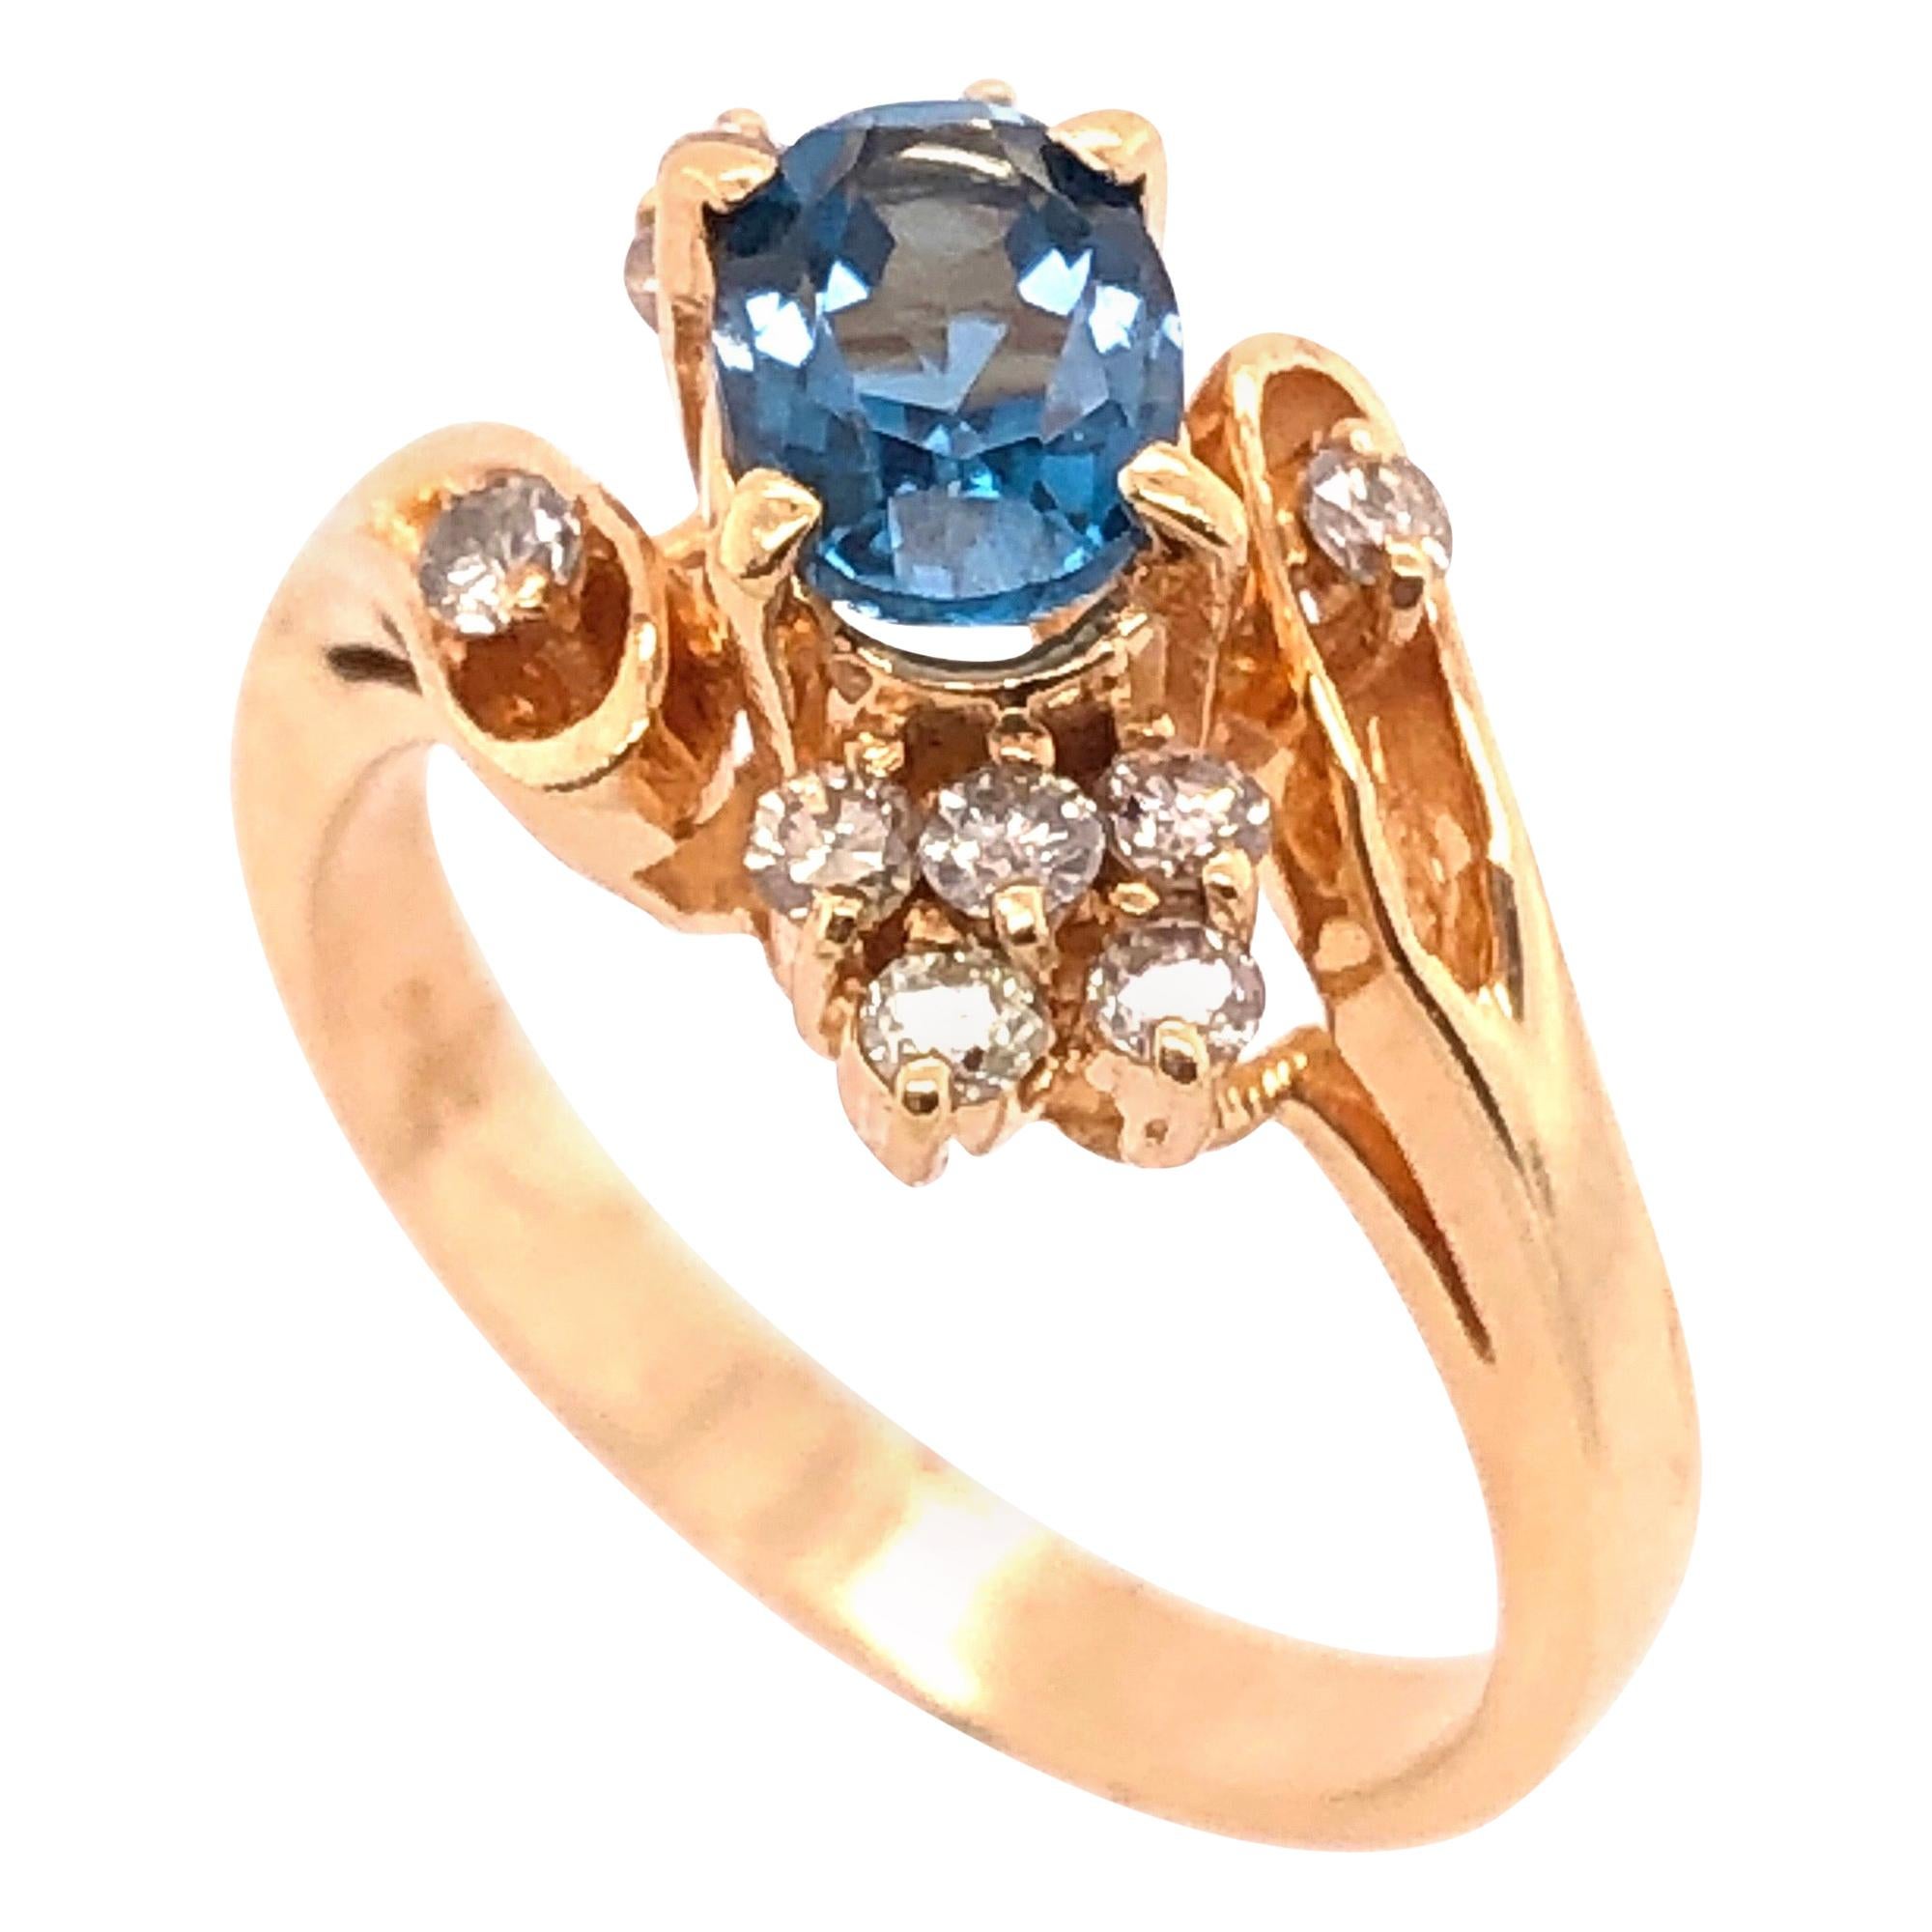 14 Karat Yellow Gold Blue Emerald Ring with Diamond Accents 50.00 TDW For Sale